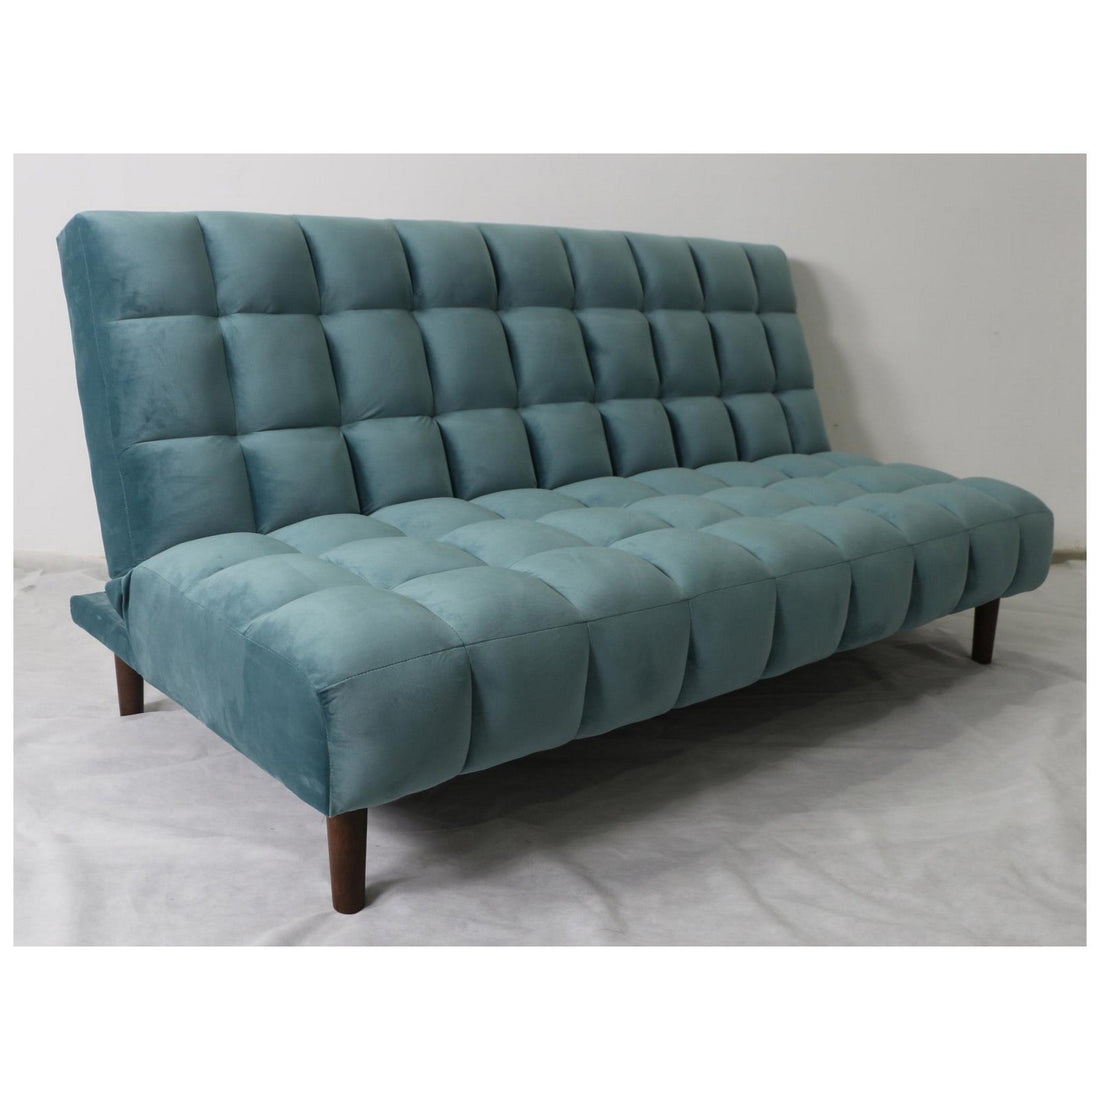 Cullen Biscuit Tufted Upholstered Sofa Bed Teal 360235